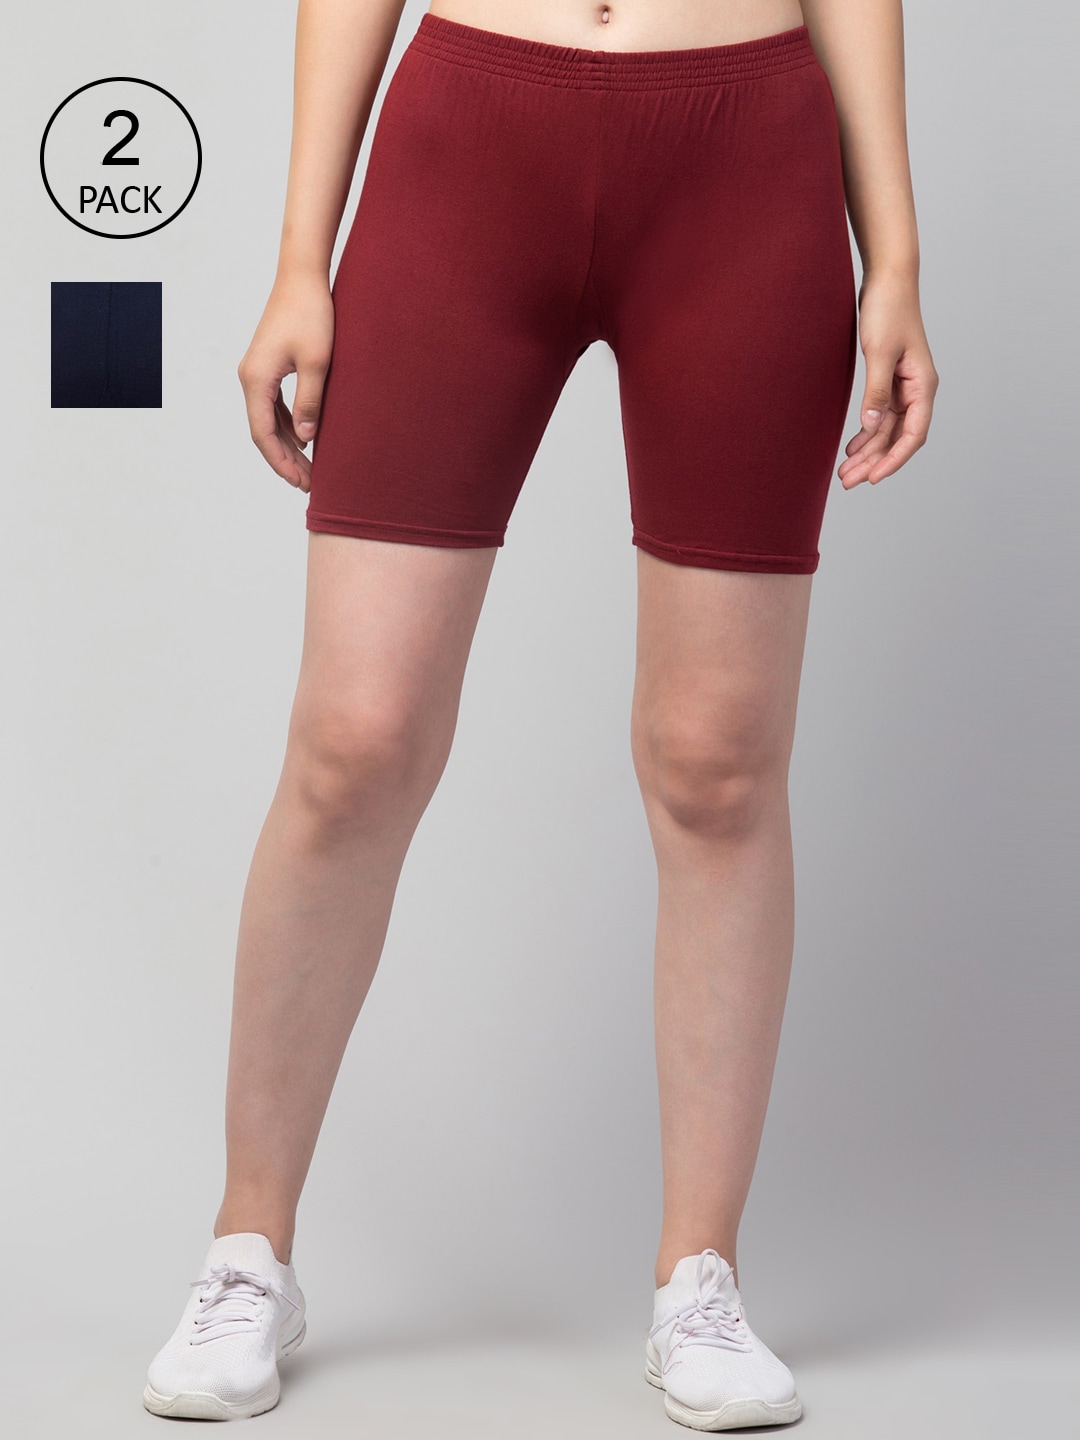 Apraa & Parma Women Set Of 2 Maroon & Navy Blue Slim Fit Cycling Sports Shorts Price in India